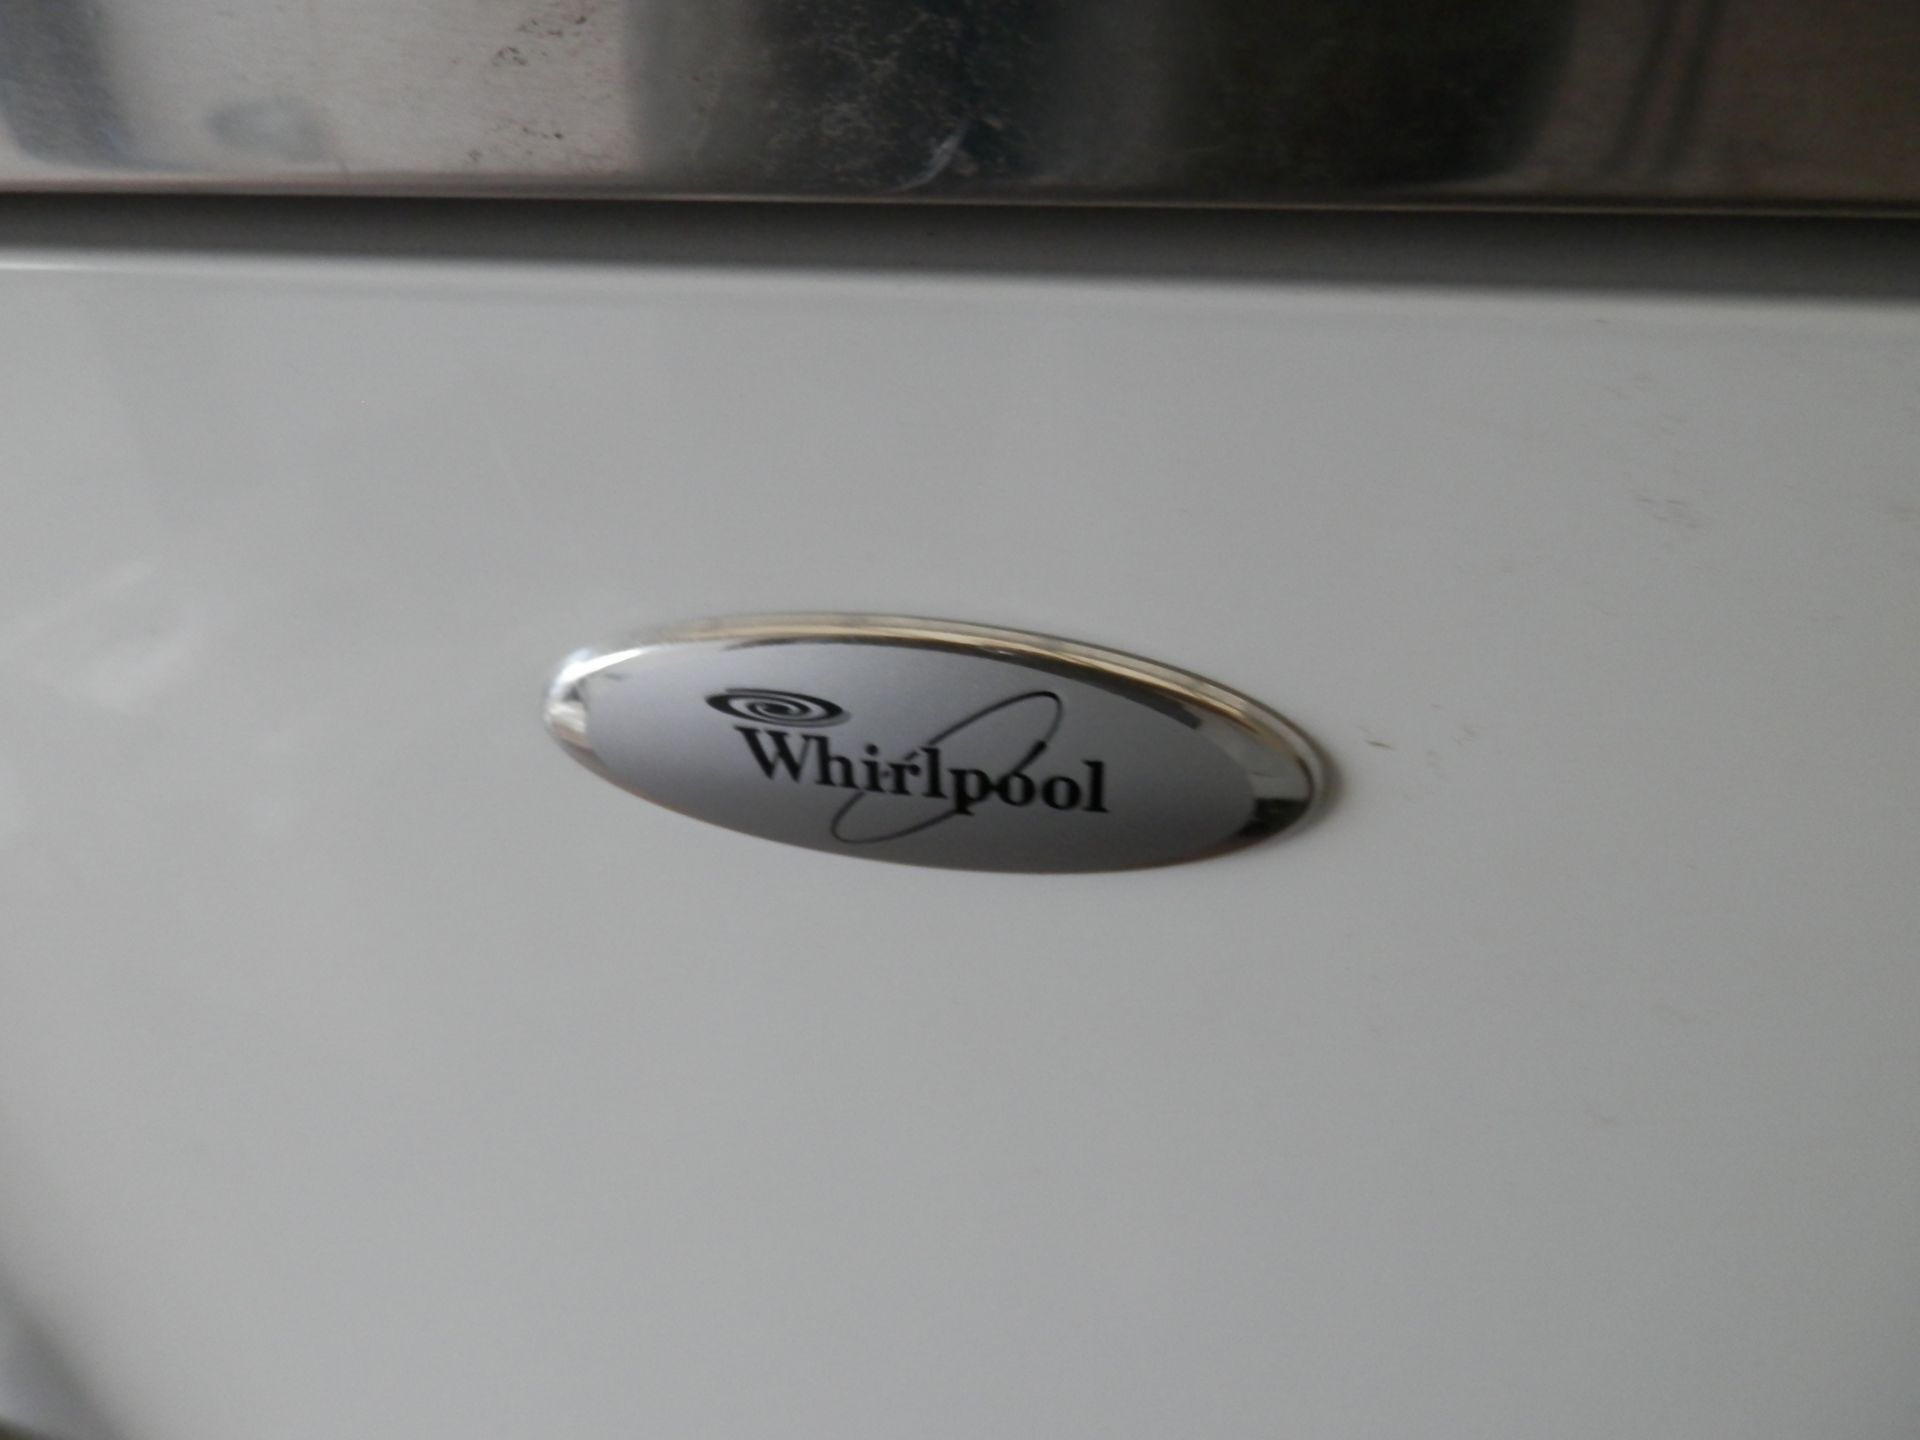 FREE STANDING WHIRLPOOL SINK, 2 HOBS & FRIDGE UNIT, IDEAL FOR MOTORHOME CONVERSION OR OFFICE ETC - Image 6 of 8